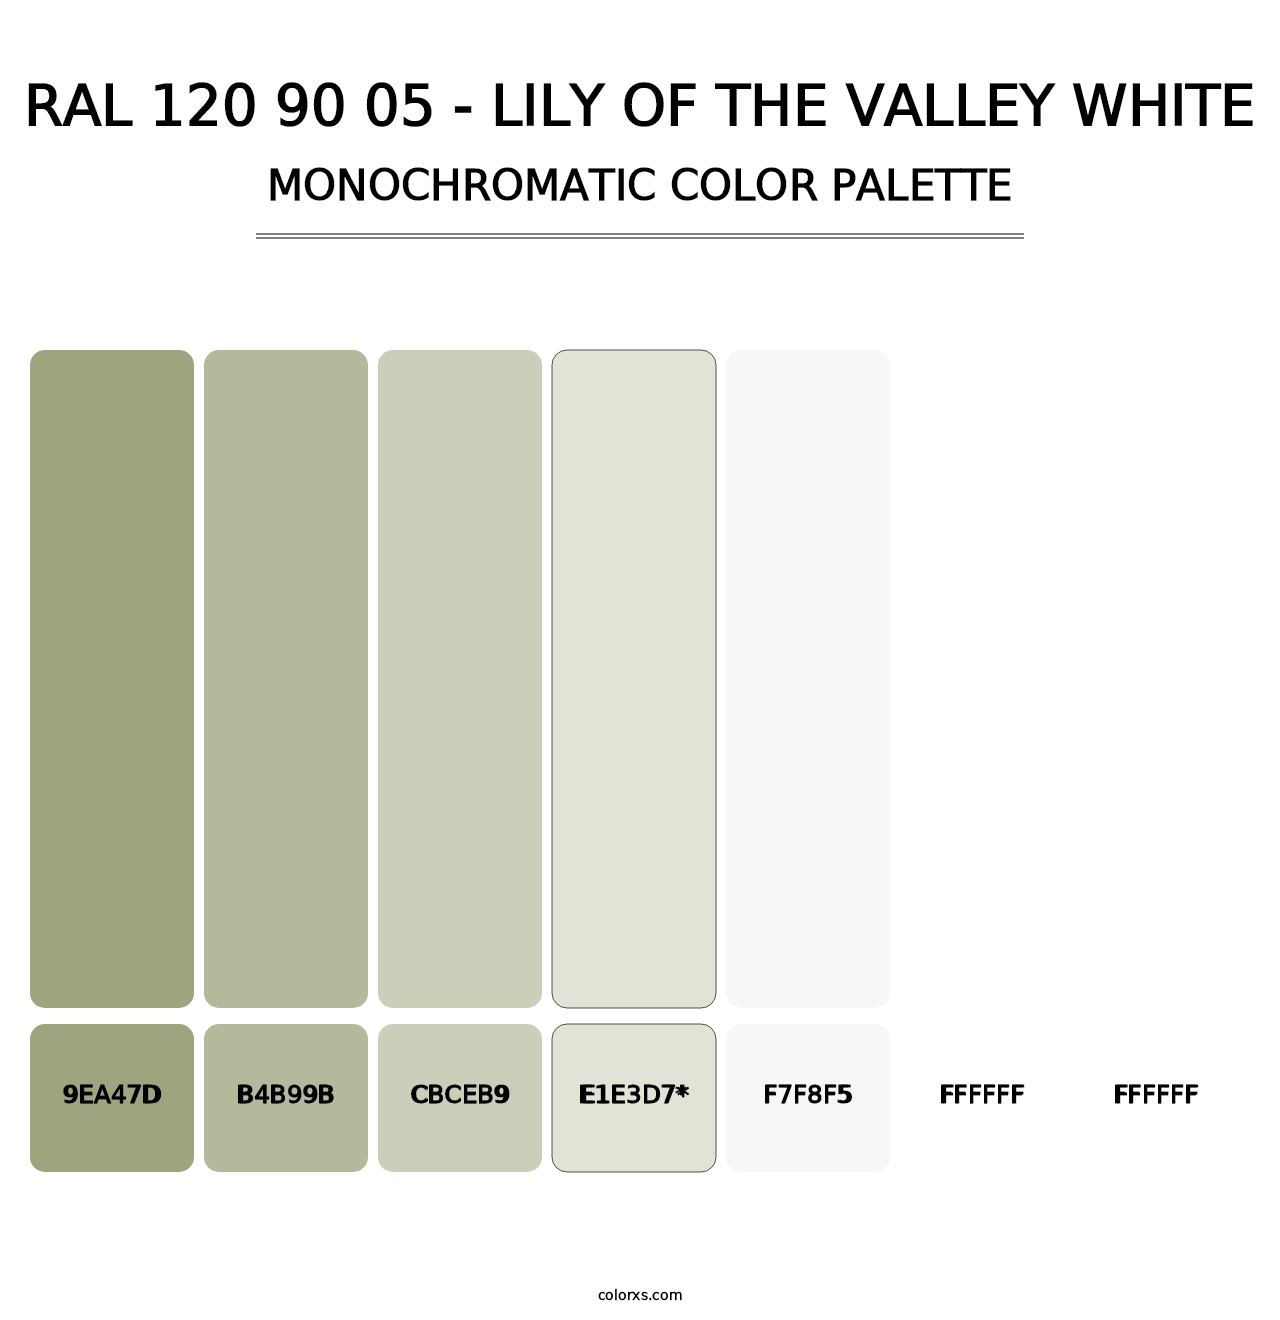 RAL 120 90 05 - Lily of the Valley White - Monochromatic Color Palette